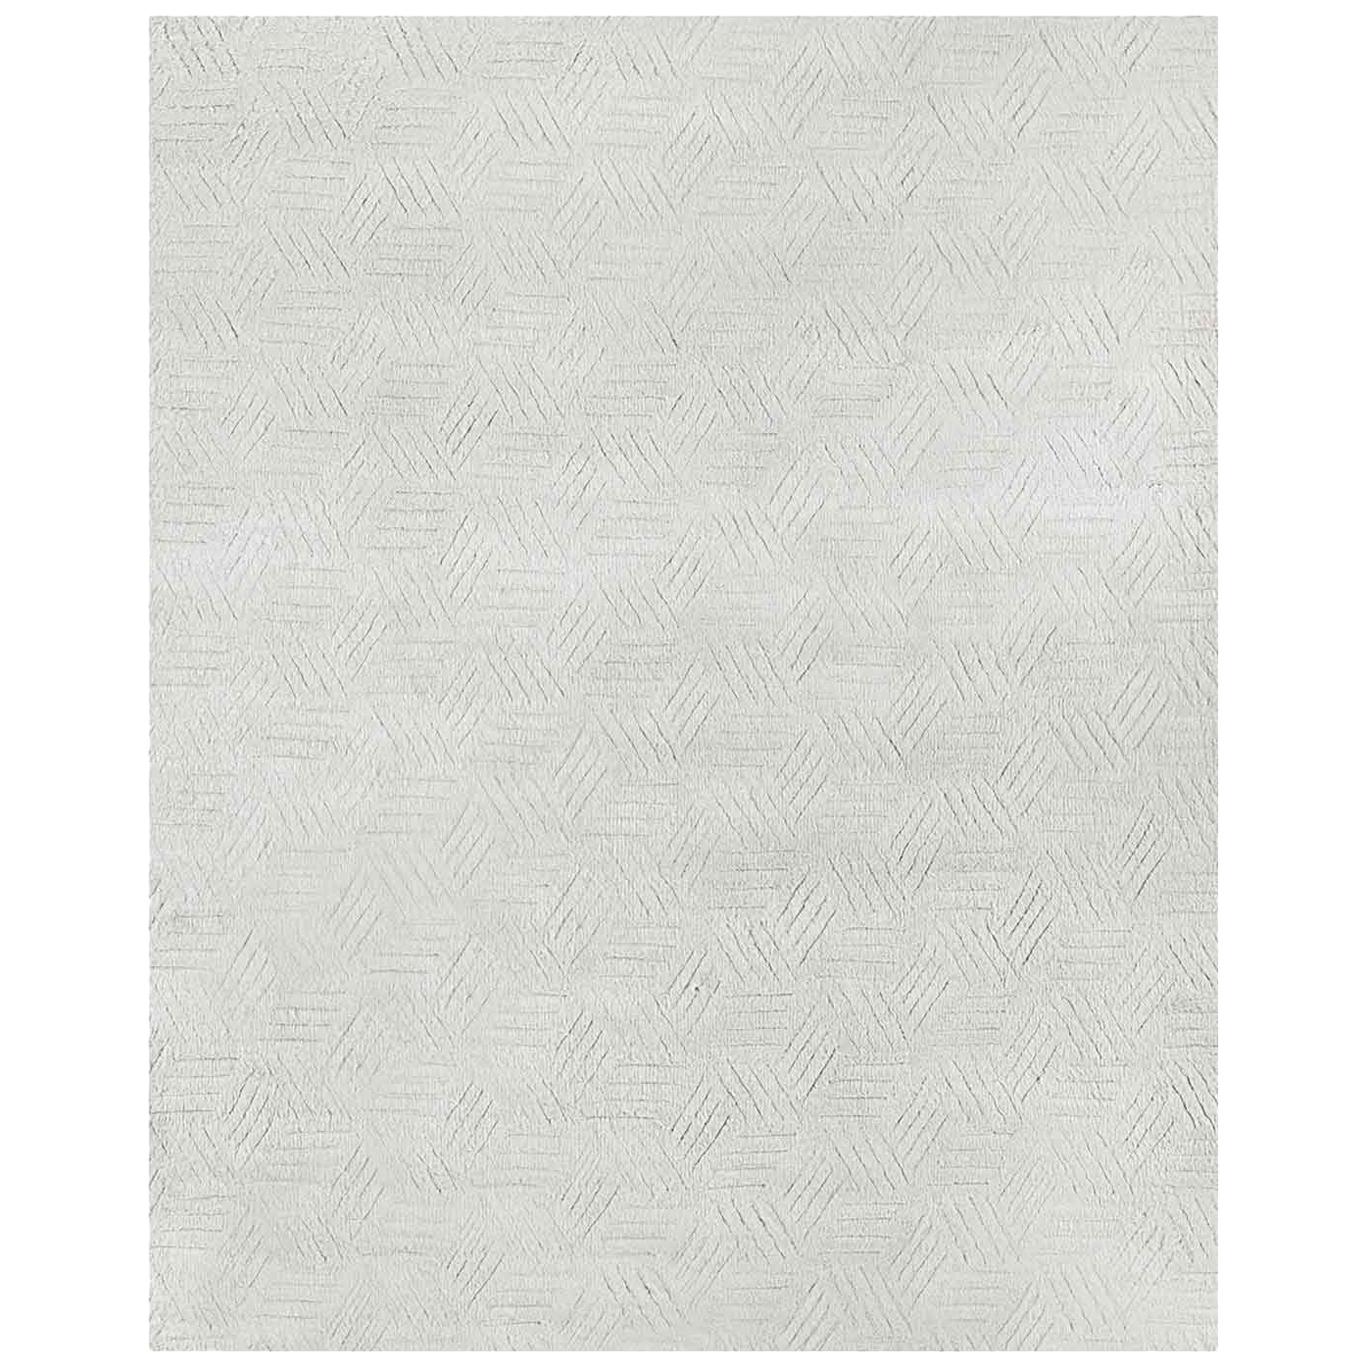 For Sale: Silver (Silver/Charcoal) Ben Soleimani Mirada Rug– Moroccan Hand-knotted Plush Silver/Charcoal 10'x14'